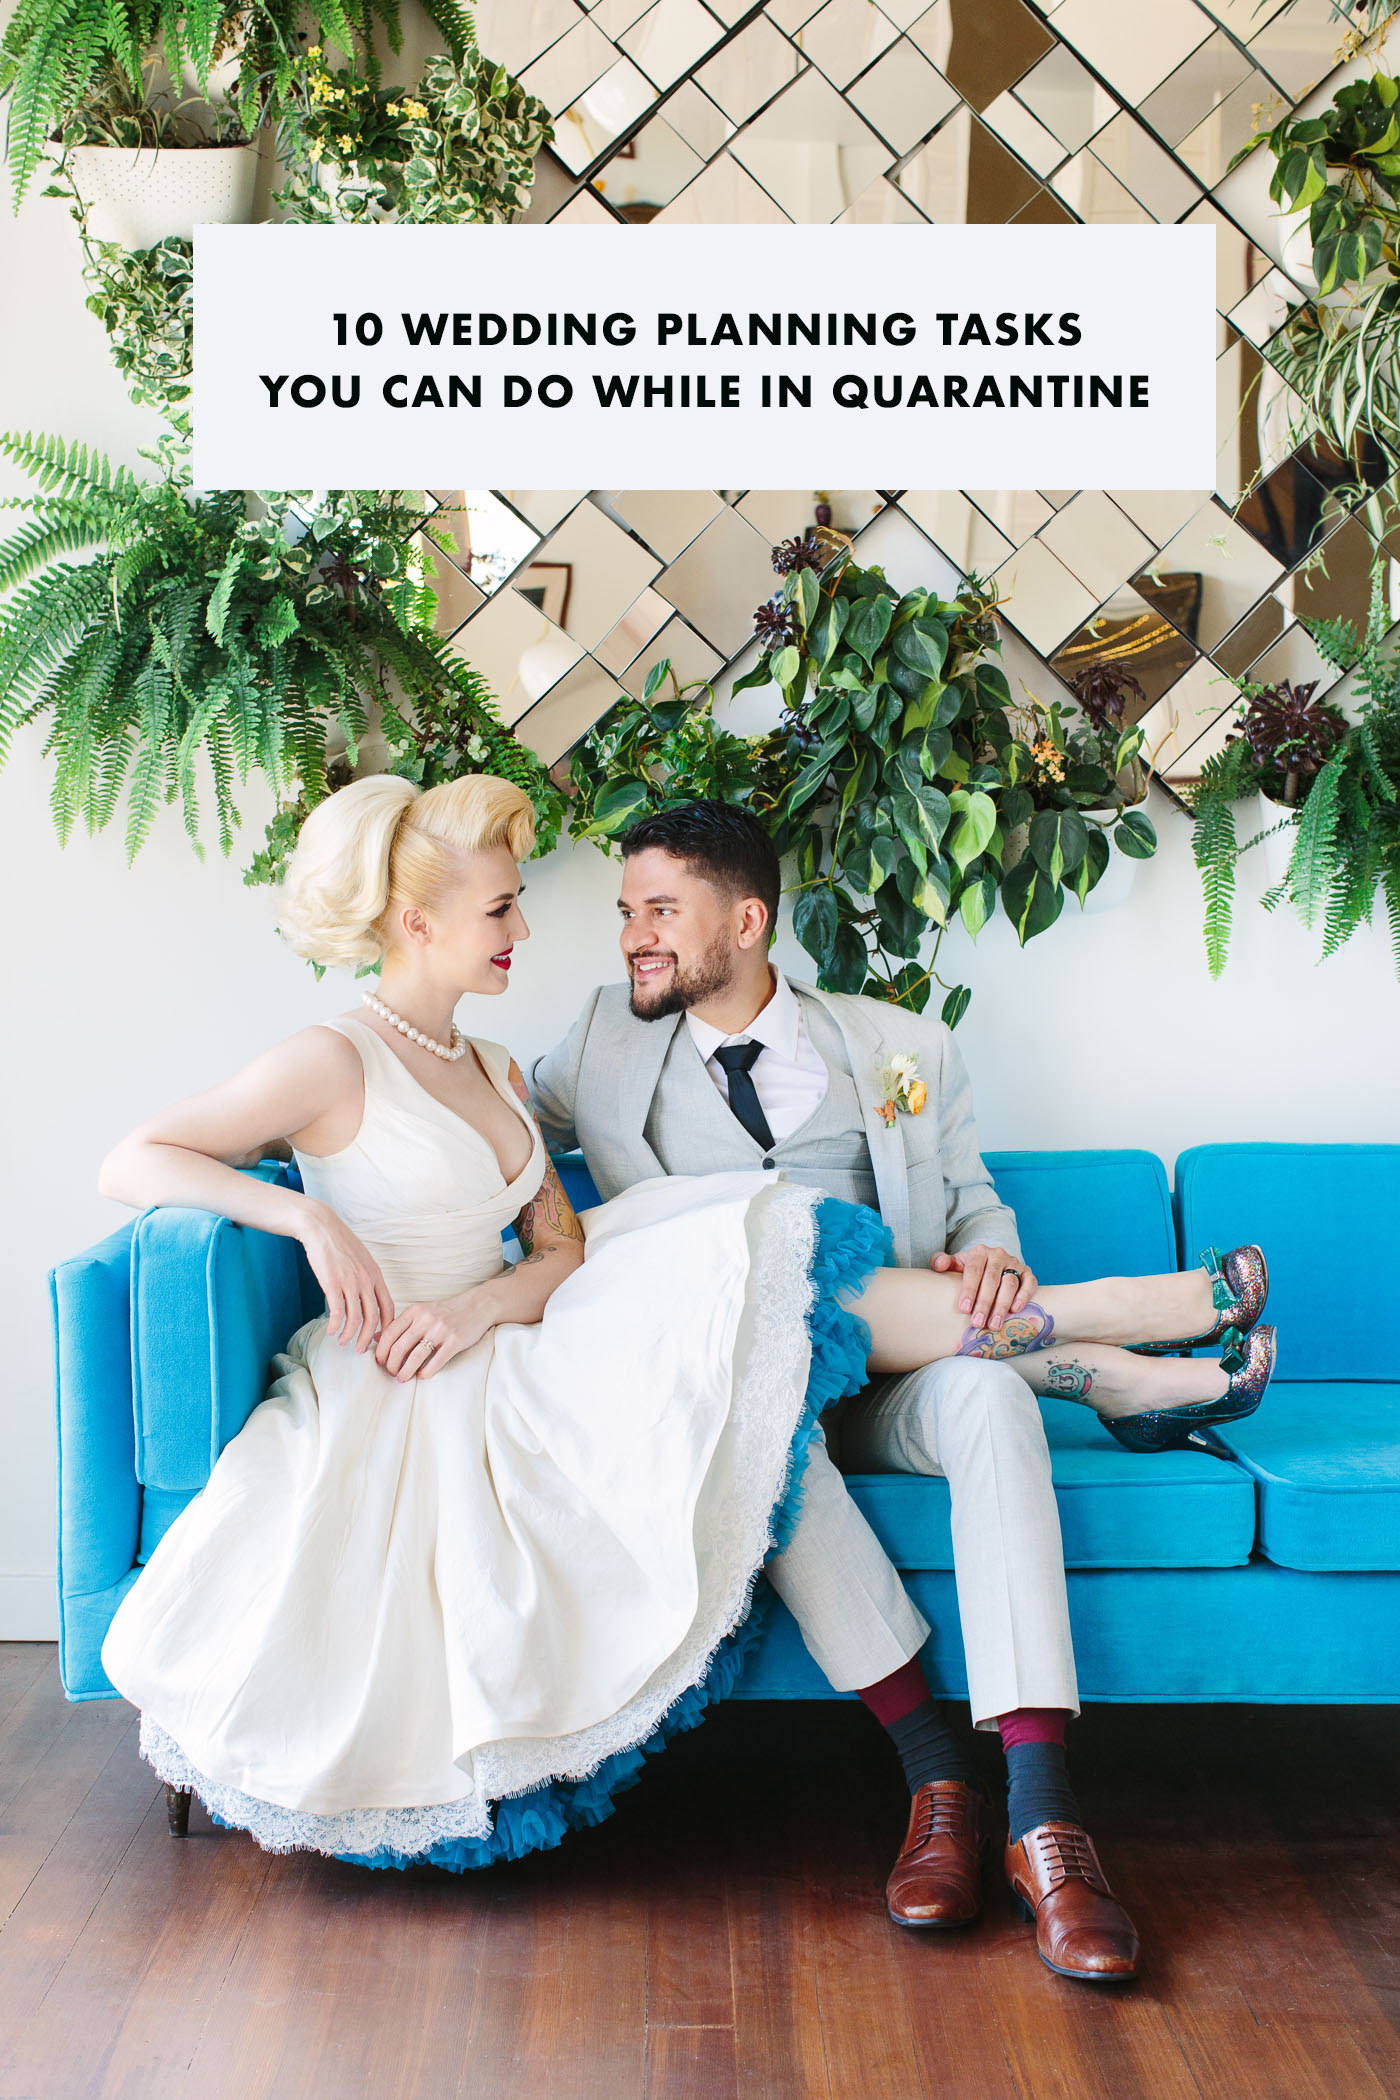 0 Wedding Planning Tasks You Can Do While in Quarantine